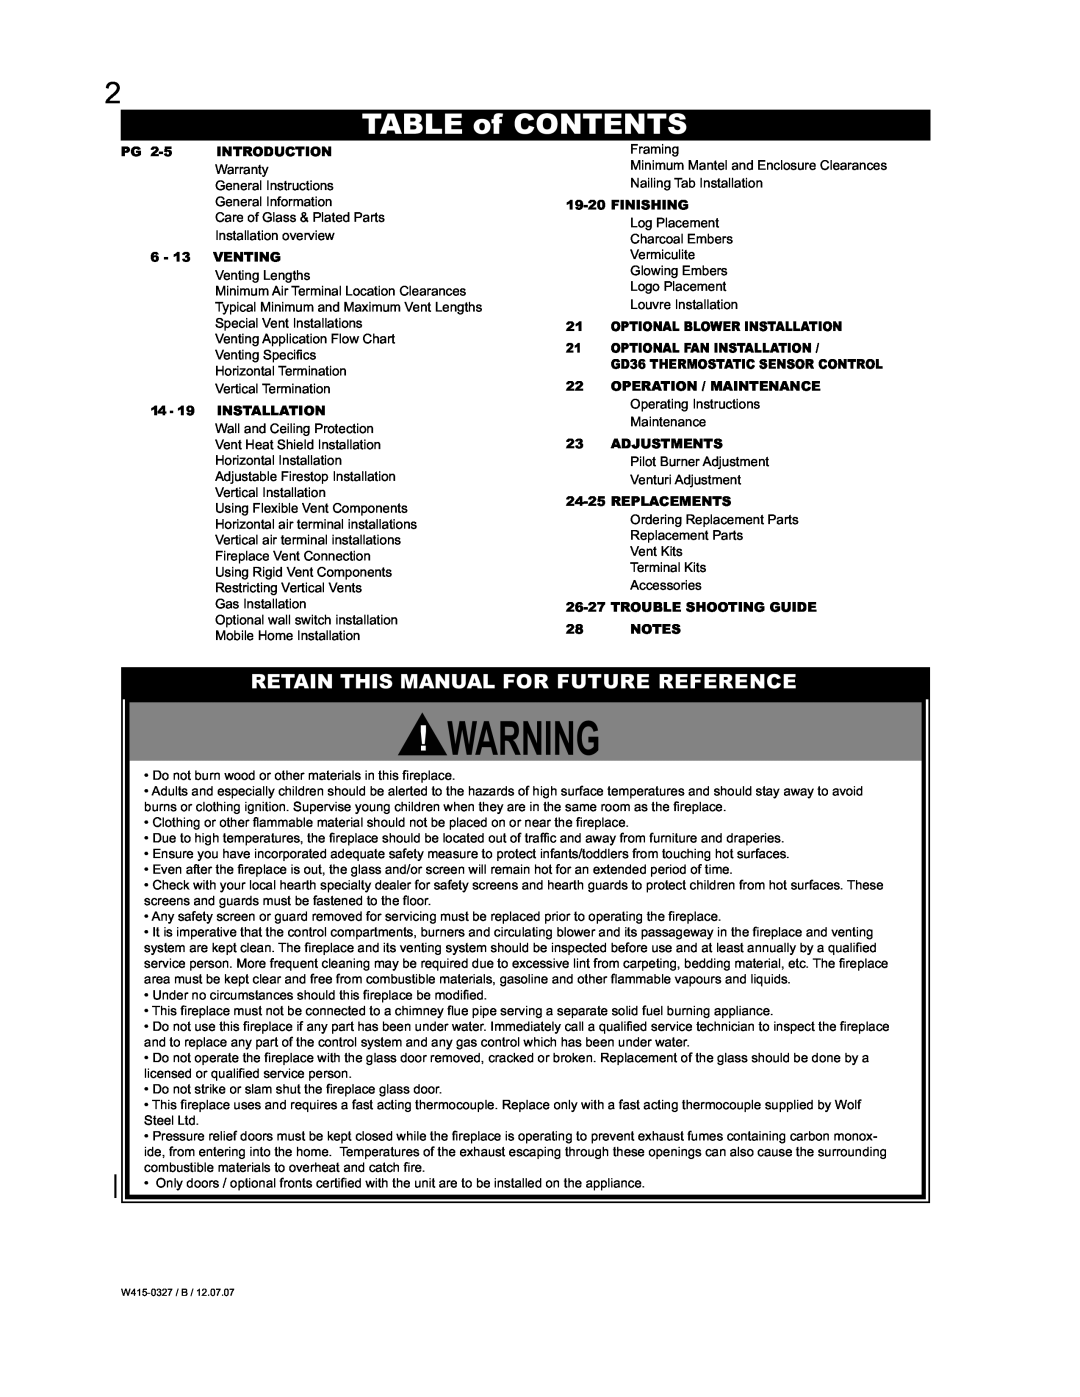 Continental BCDV48P, BCDV48N manual TABLE of CONTENTS, Retain This Manual For Future Reference 